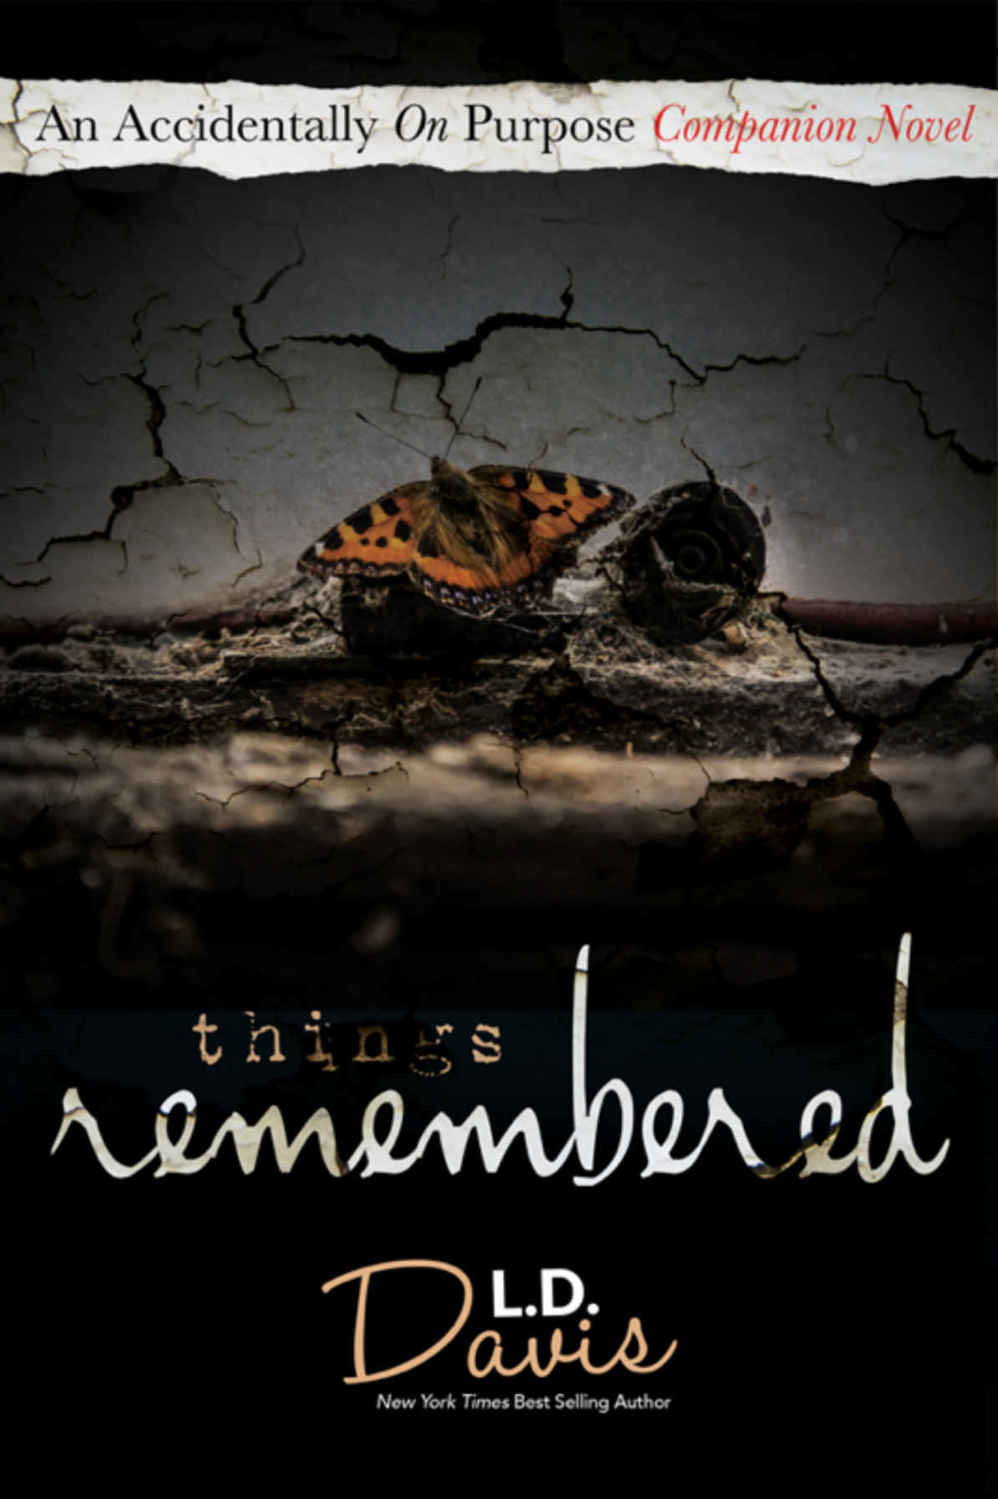 Things Remembered (Accidentally On Purpose Companion Novel #3) by L.D. Davis